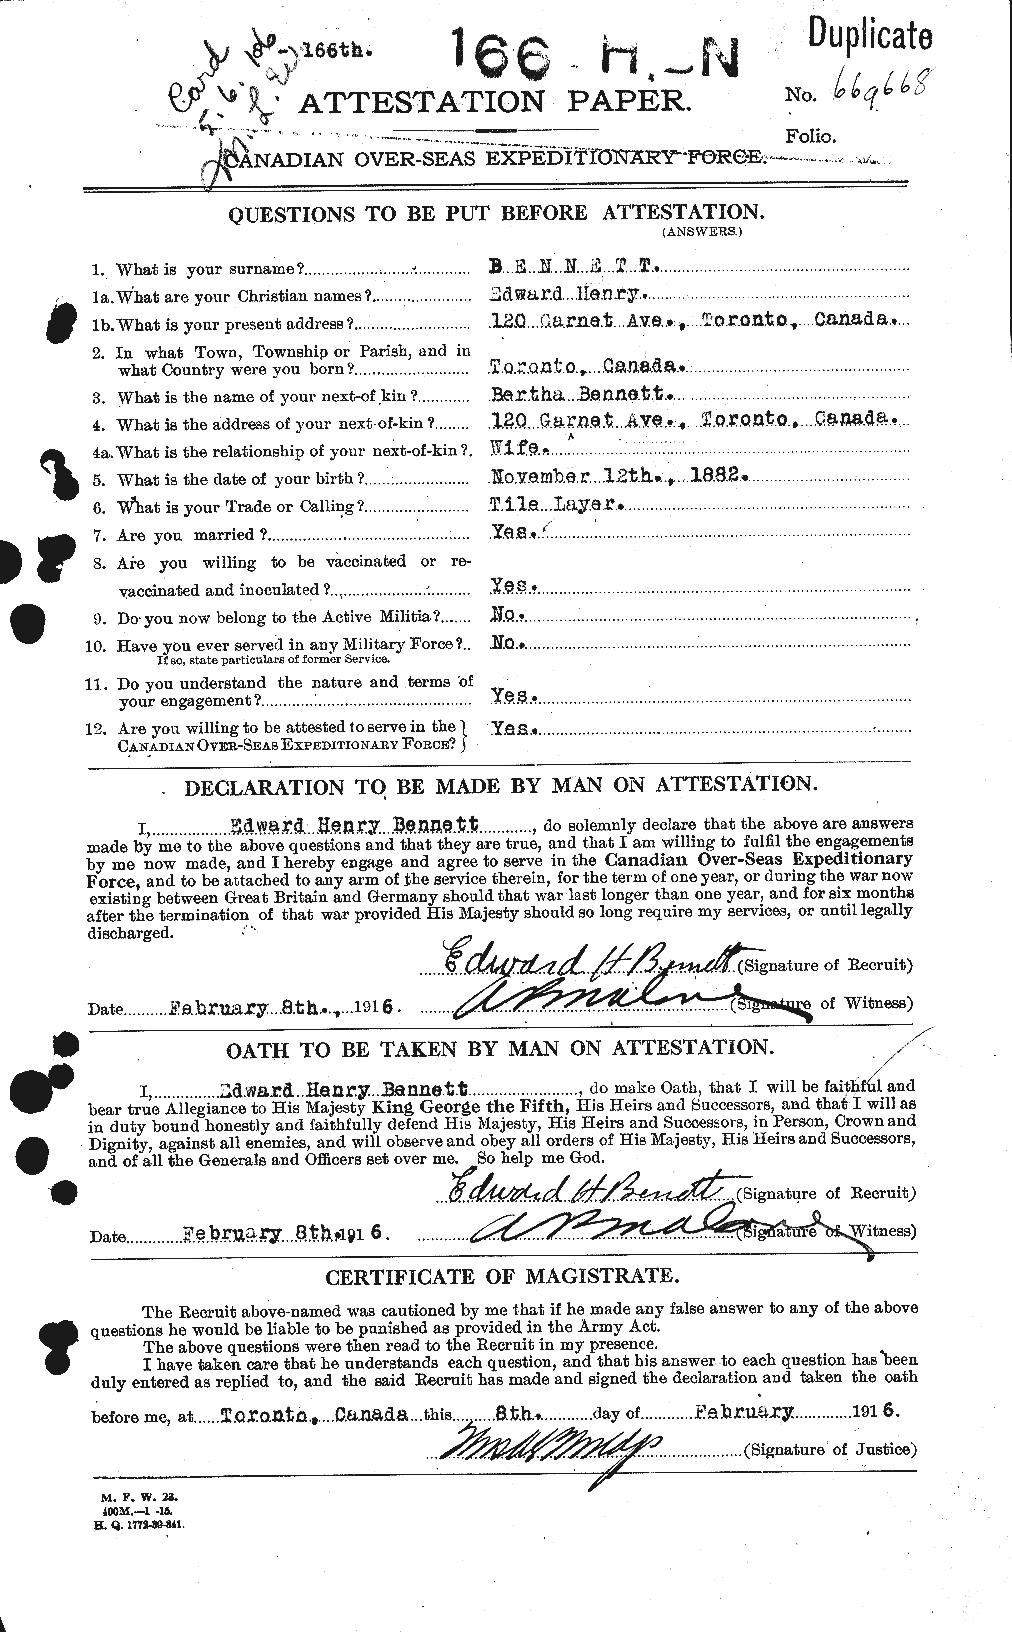 Personnel Records of the First World War - CEF 233463a